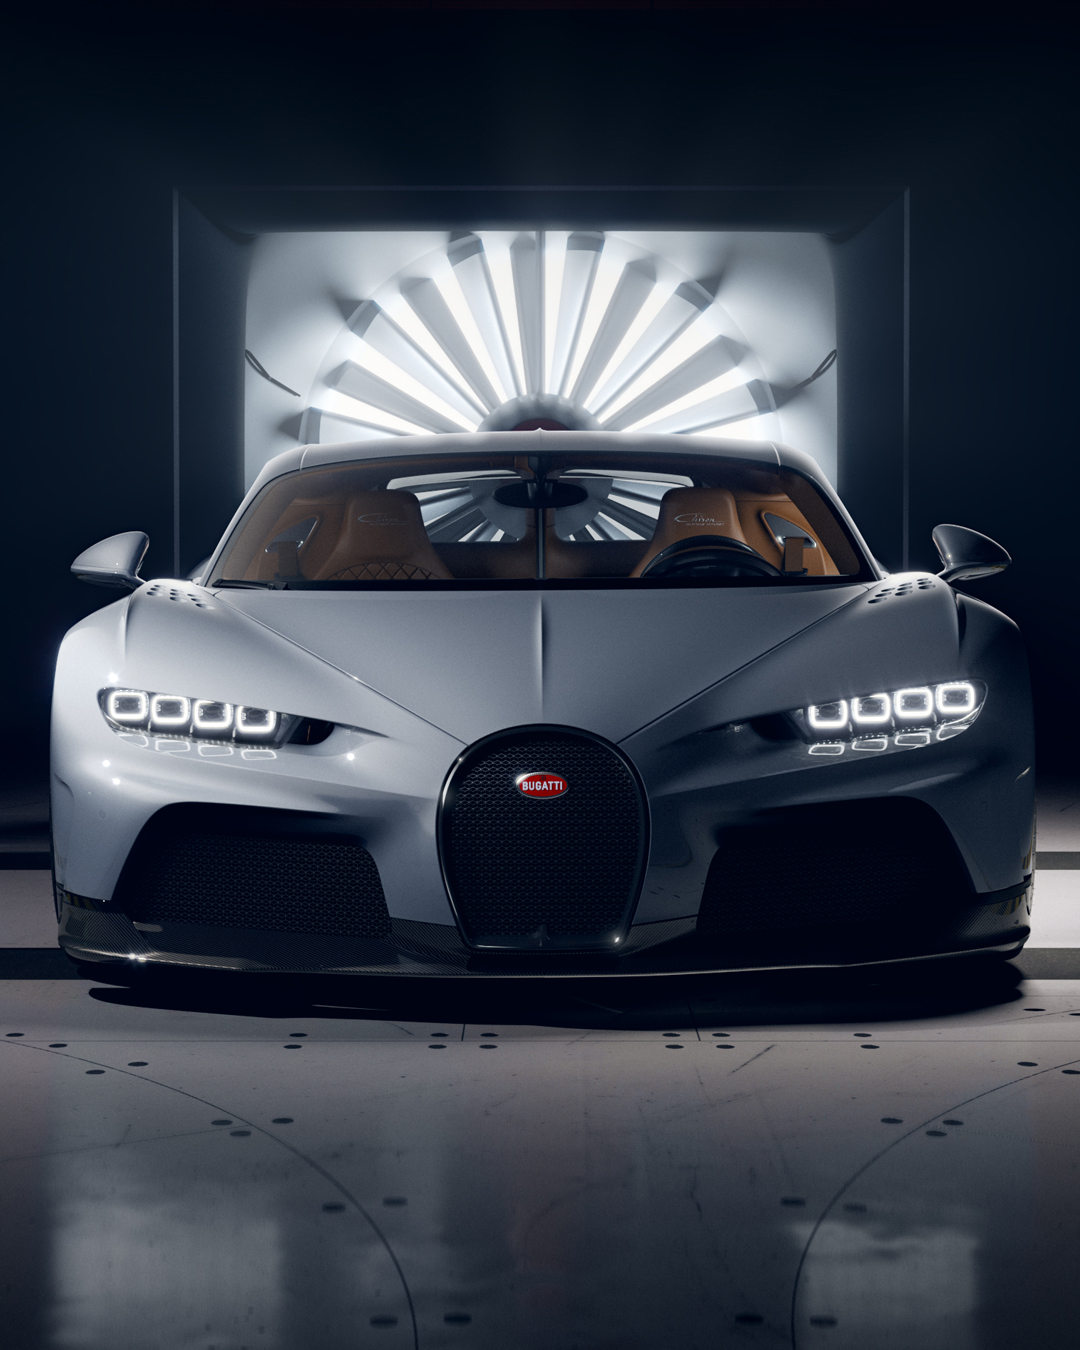 Wat mensen betreft Commandant lobby Bugatti on Twitter: "Welcome to the Chiron Super Sport - the quintessence  of luxury and speed. With the Super Sport, #BUGATTI is following a  tradition of combining unparalleled speeds with comfort. The